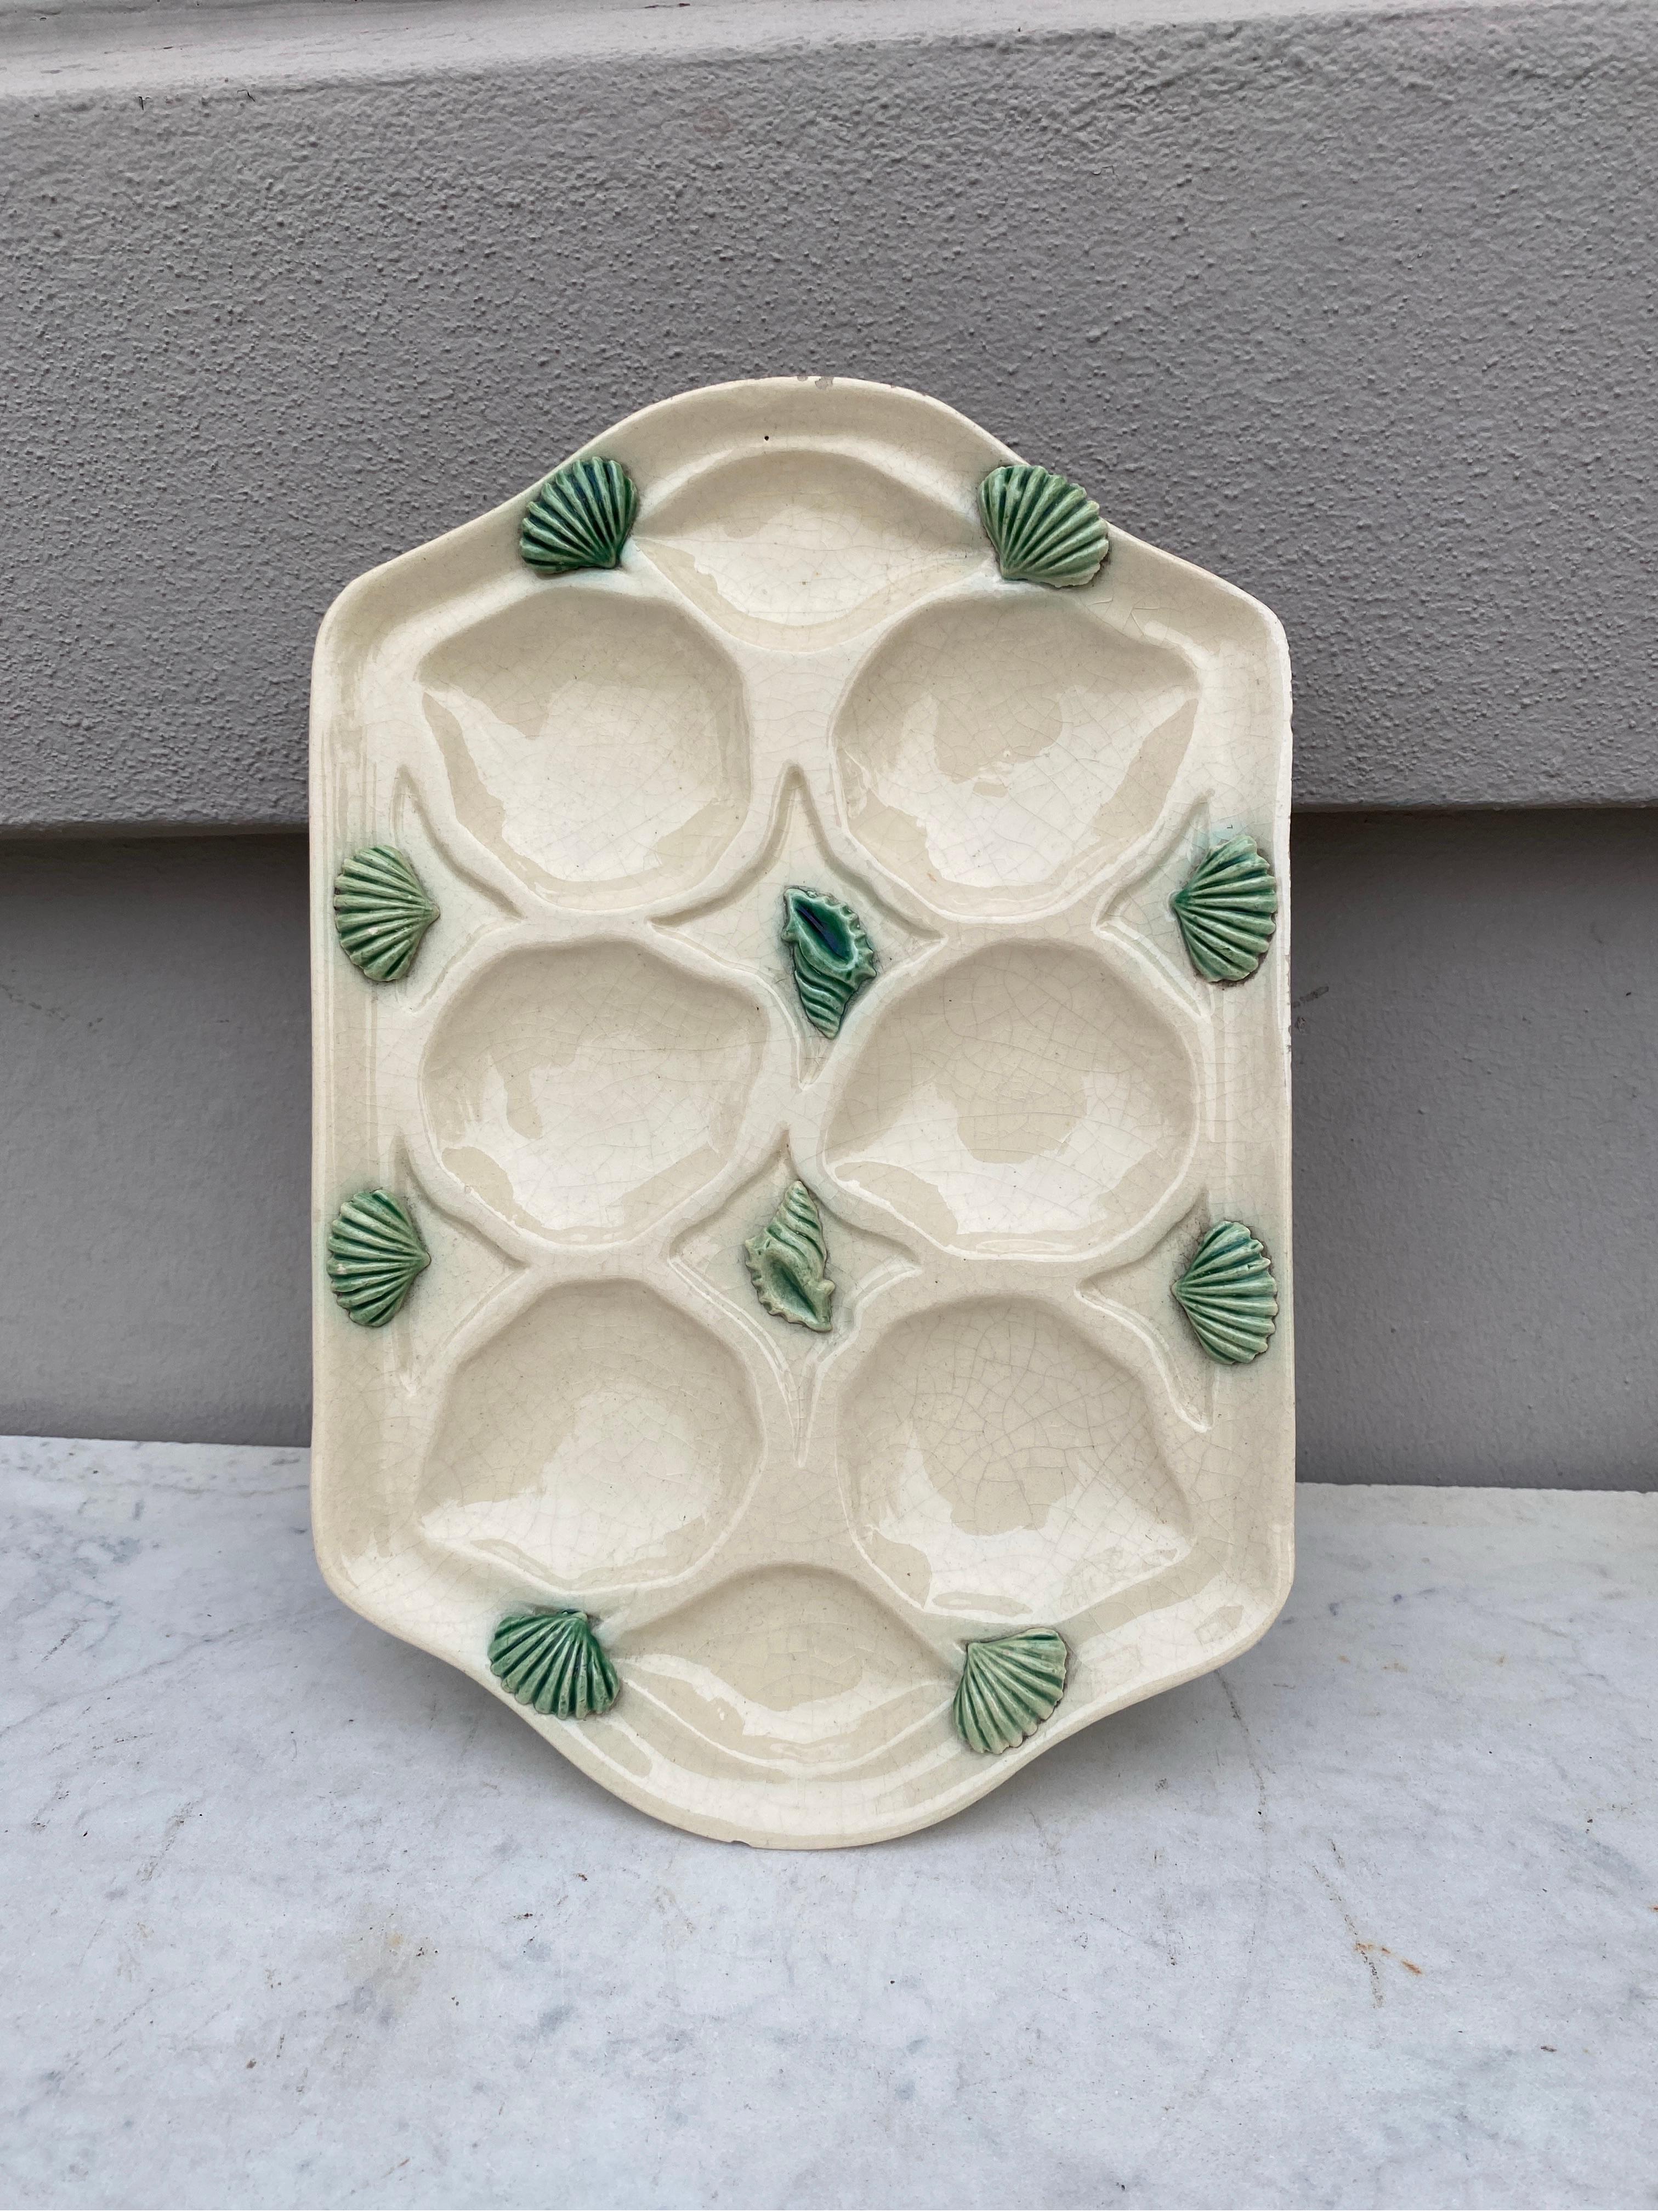 French Majolica Oyster Platter signed Manufacture of Mougins, circa 1950.
Decorated with shells.